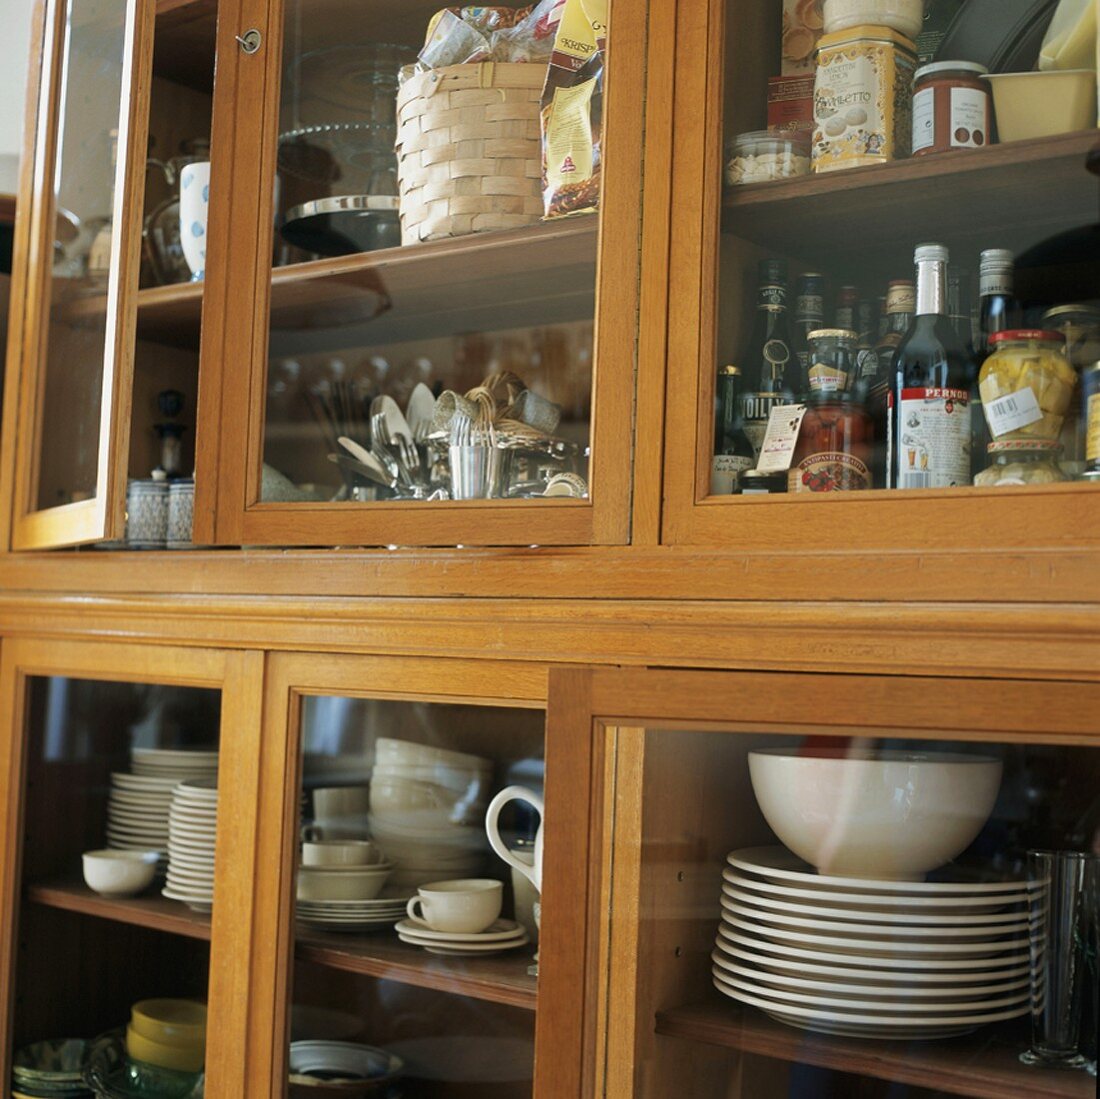 Crockery and groceries in kitchen cupboard